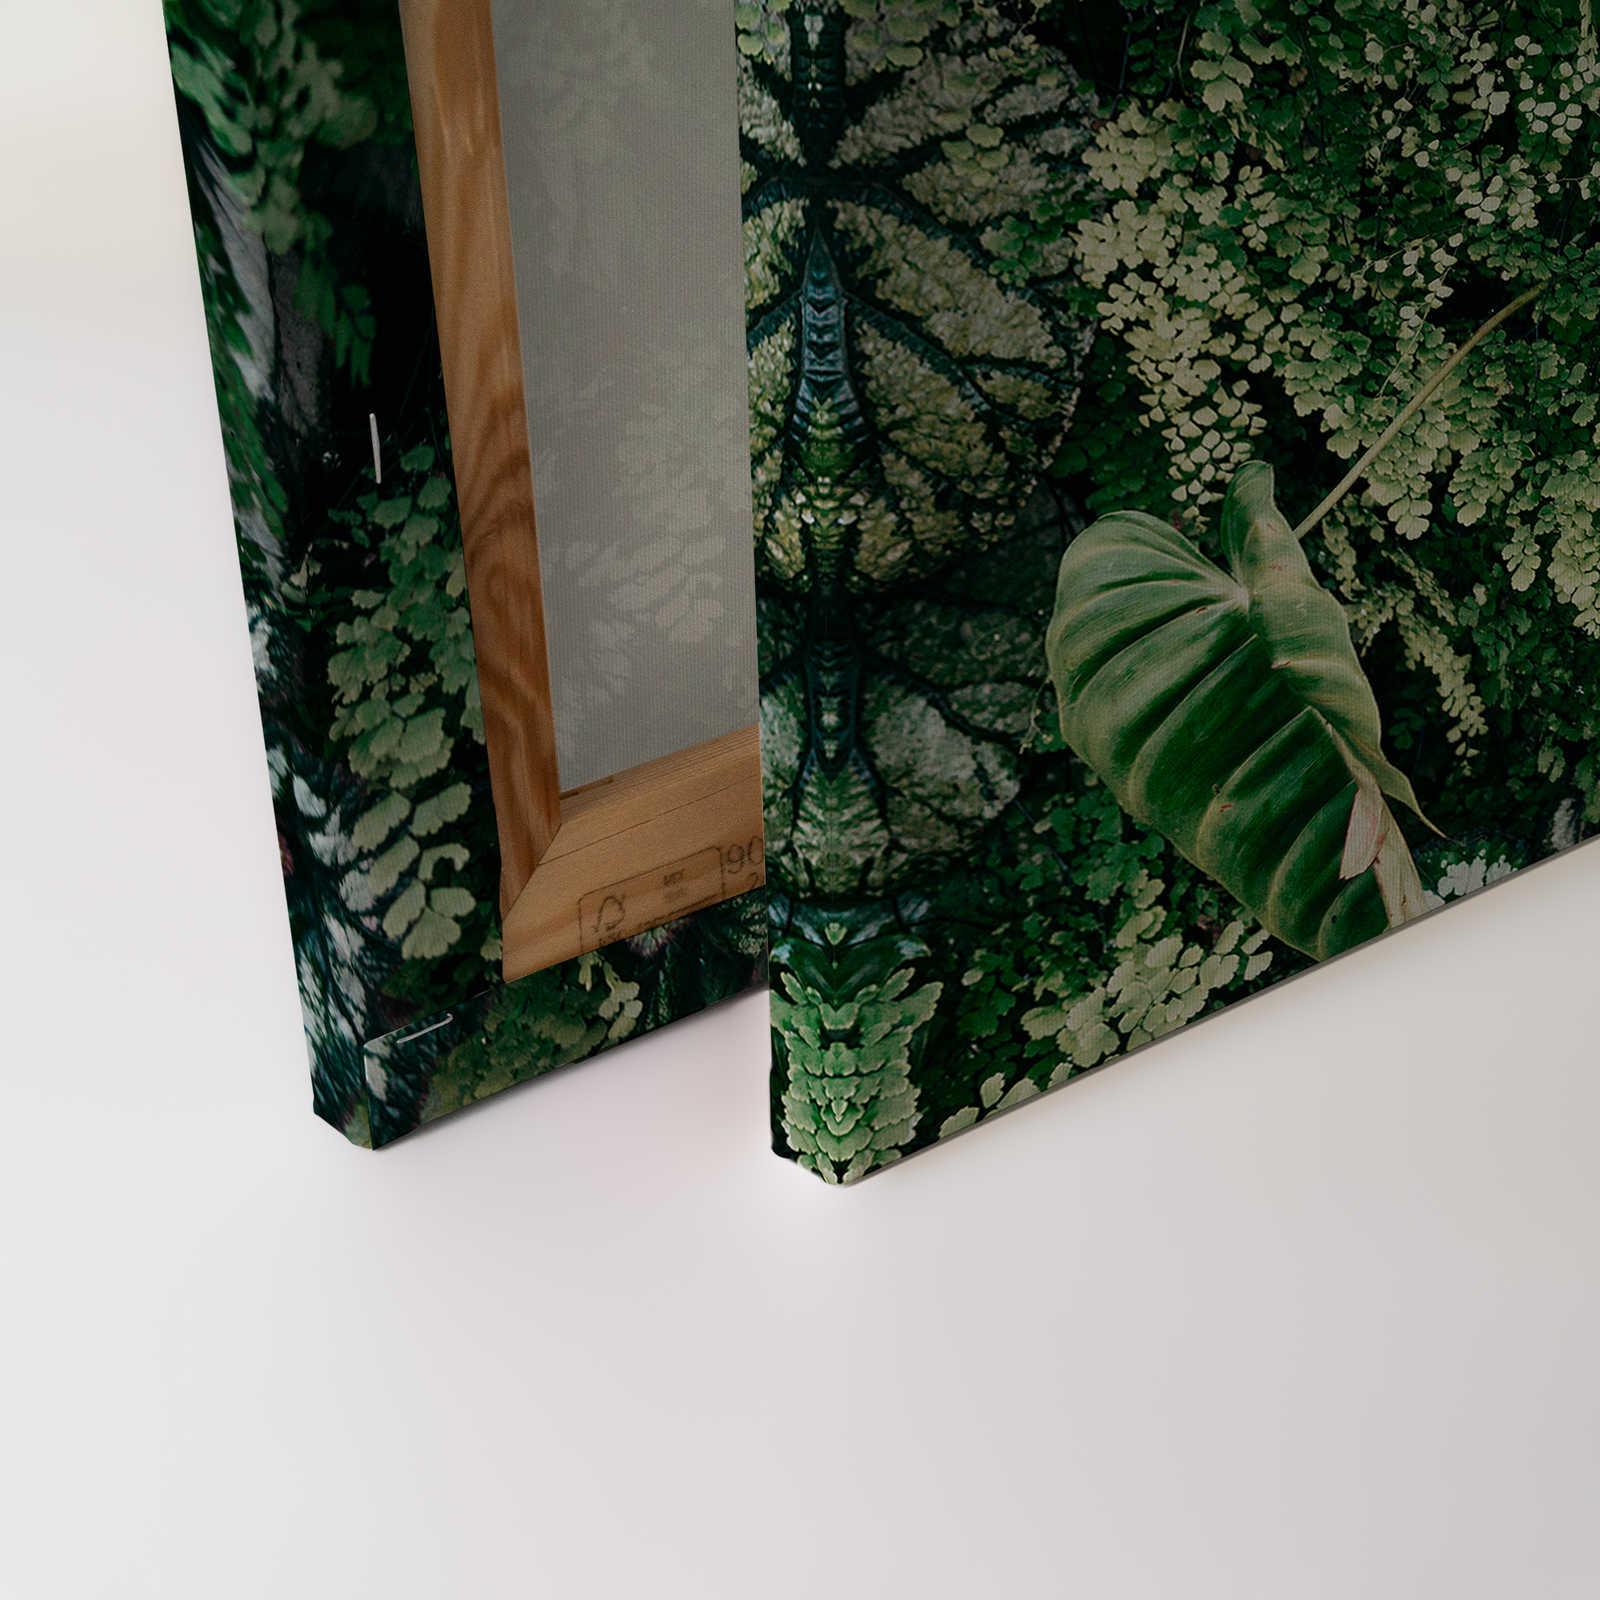             Deep Green 2 - Canvas painting Foliage thicket, ferns & hanging plants - 1.20 m x 0.80 m
        